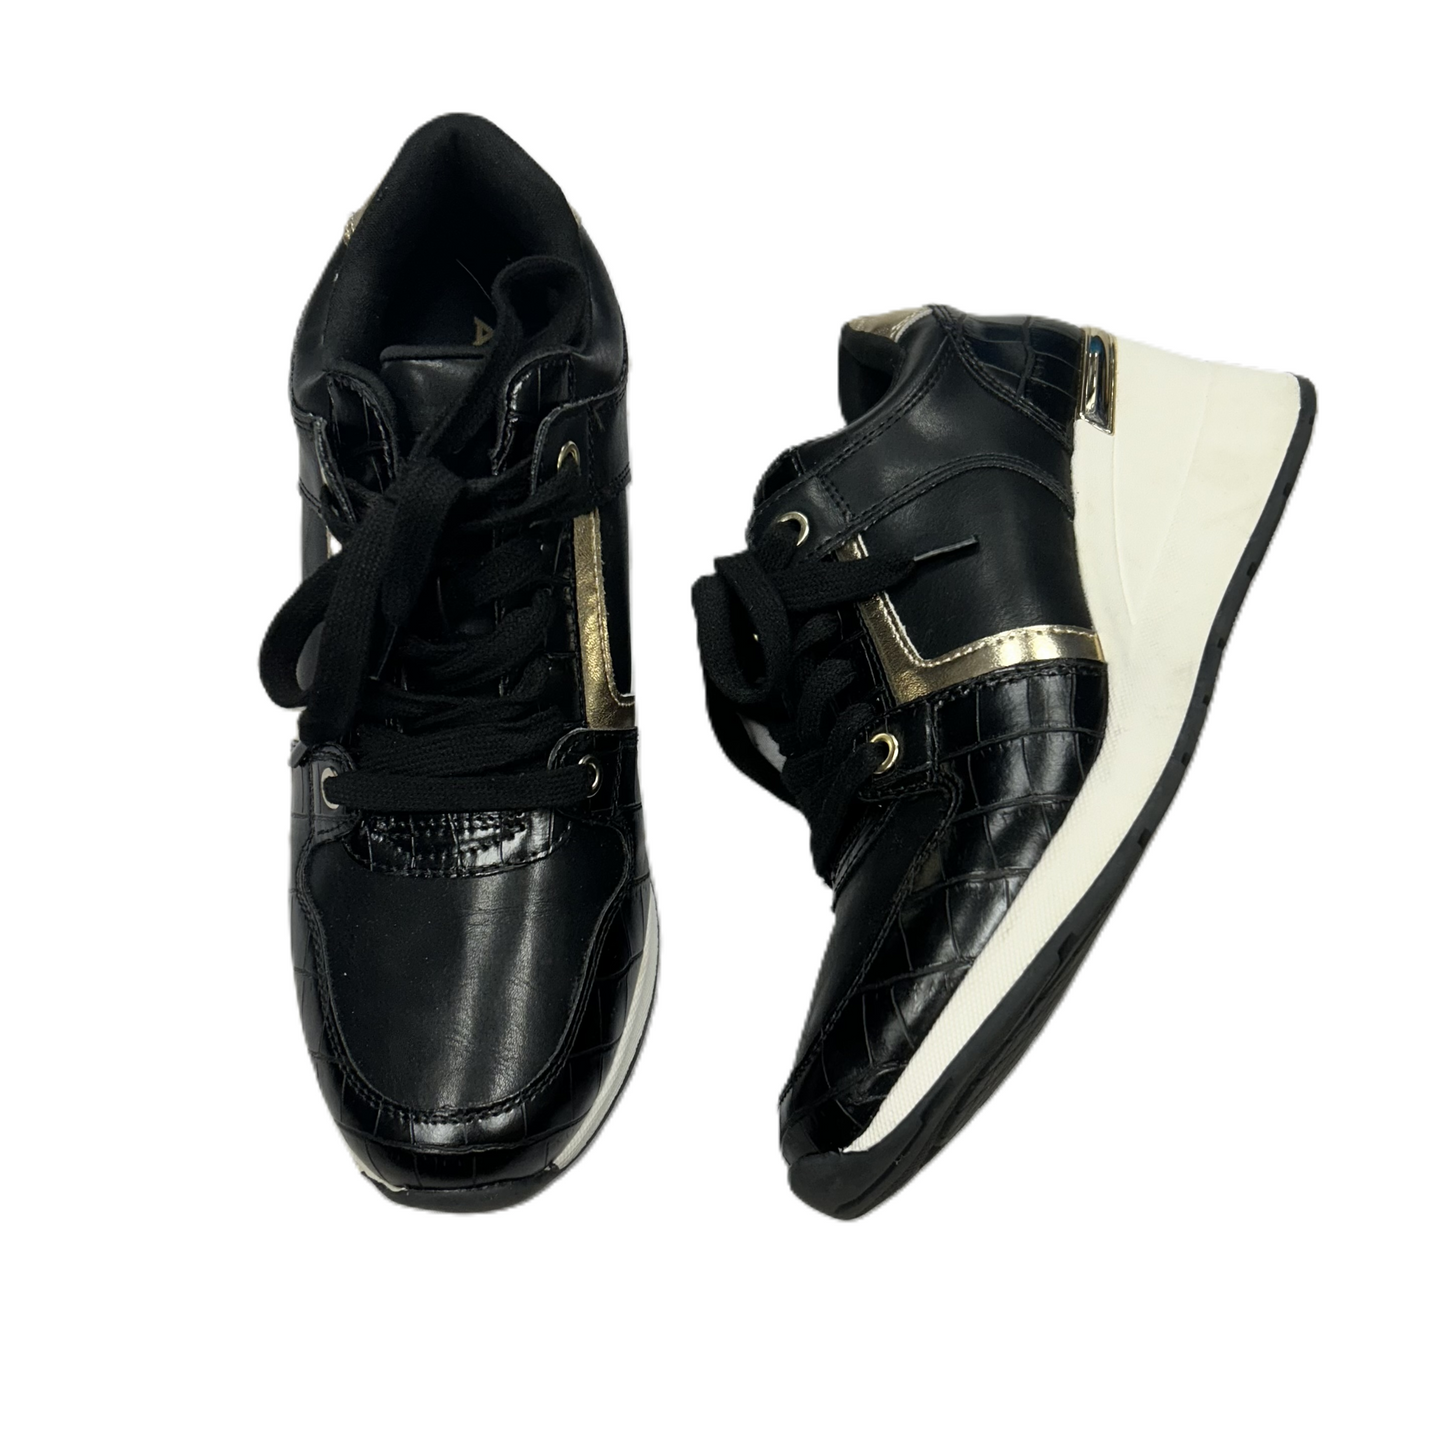 Black & Gold Shoes Sneakers By Aldo, Size: 7.5